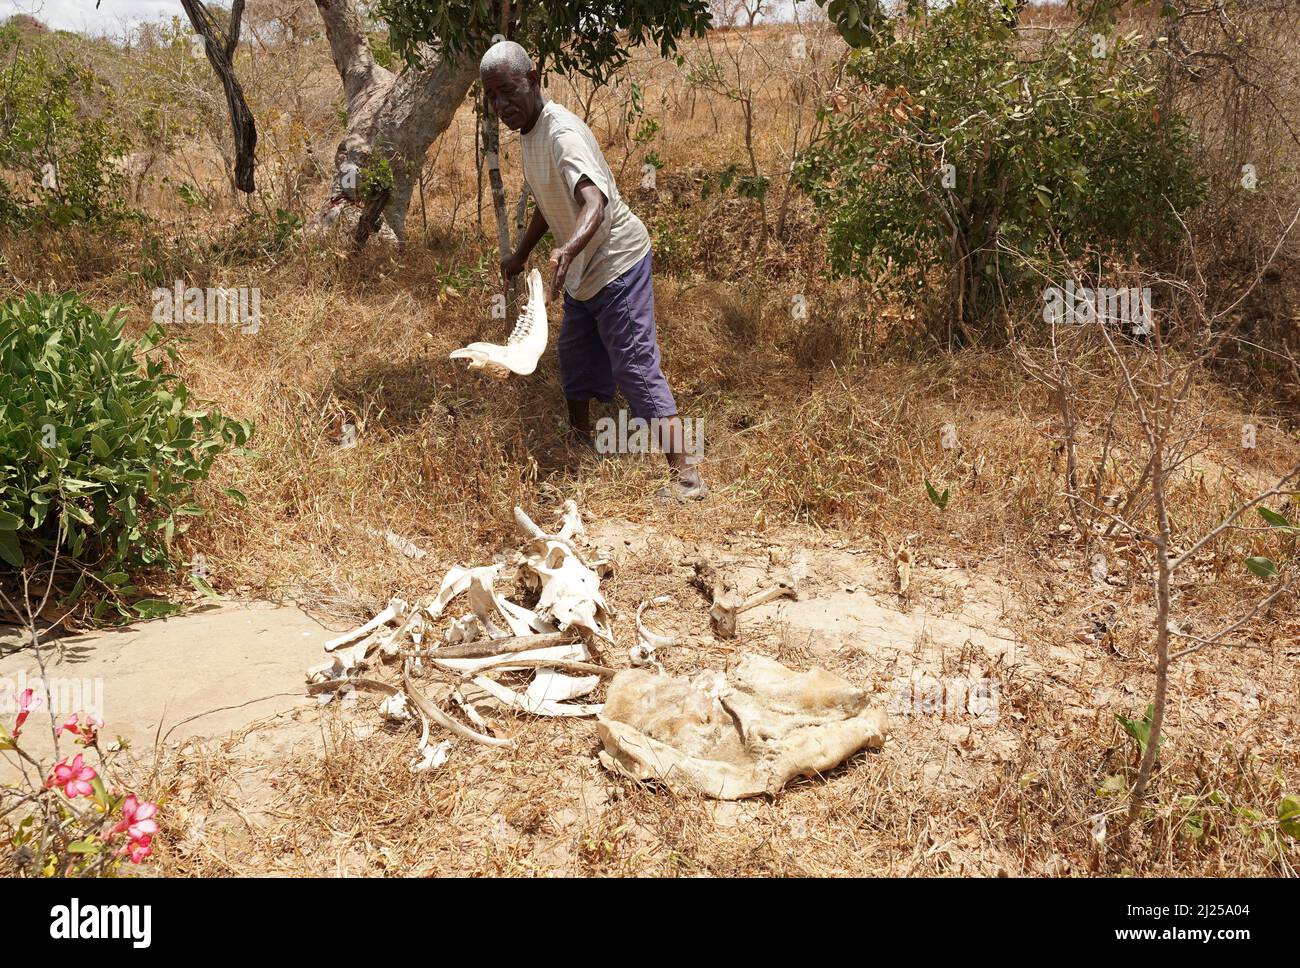 (220330) -- KILIFI, March 30, 2022 (Xinhua) -- Villager Eliud Karisa shows the remains of his dead cows in Kidemu sub-location in Kilifi County, Kenya, March 23, 2022. Scattered on the five-acre farm in Bandari village, Kidemu sub-location in Kenya's coastal Kilifi County, were withered maize crops. Adam Ndamunga, an officer with Kenya National Drought Management Authority (NDMA) in Kilifi, said the drought situation in the region started in August 2021 and has been progressing due to inadequate rains. The United Nations relief agency said the Horn of Africa is experiencing one of its w Stock Photo